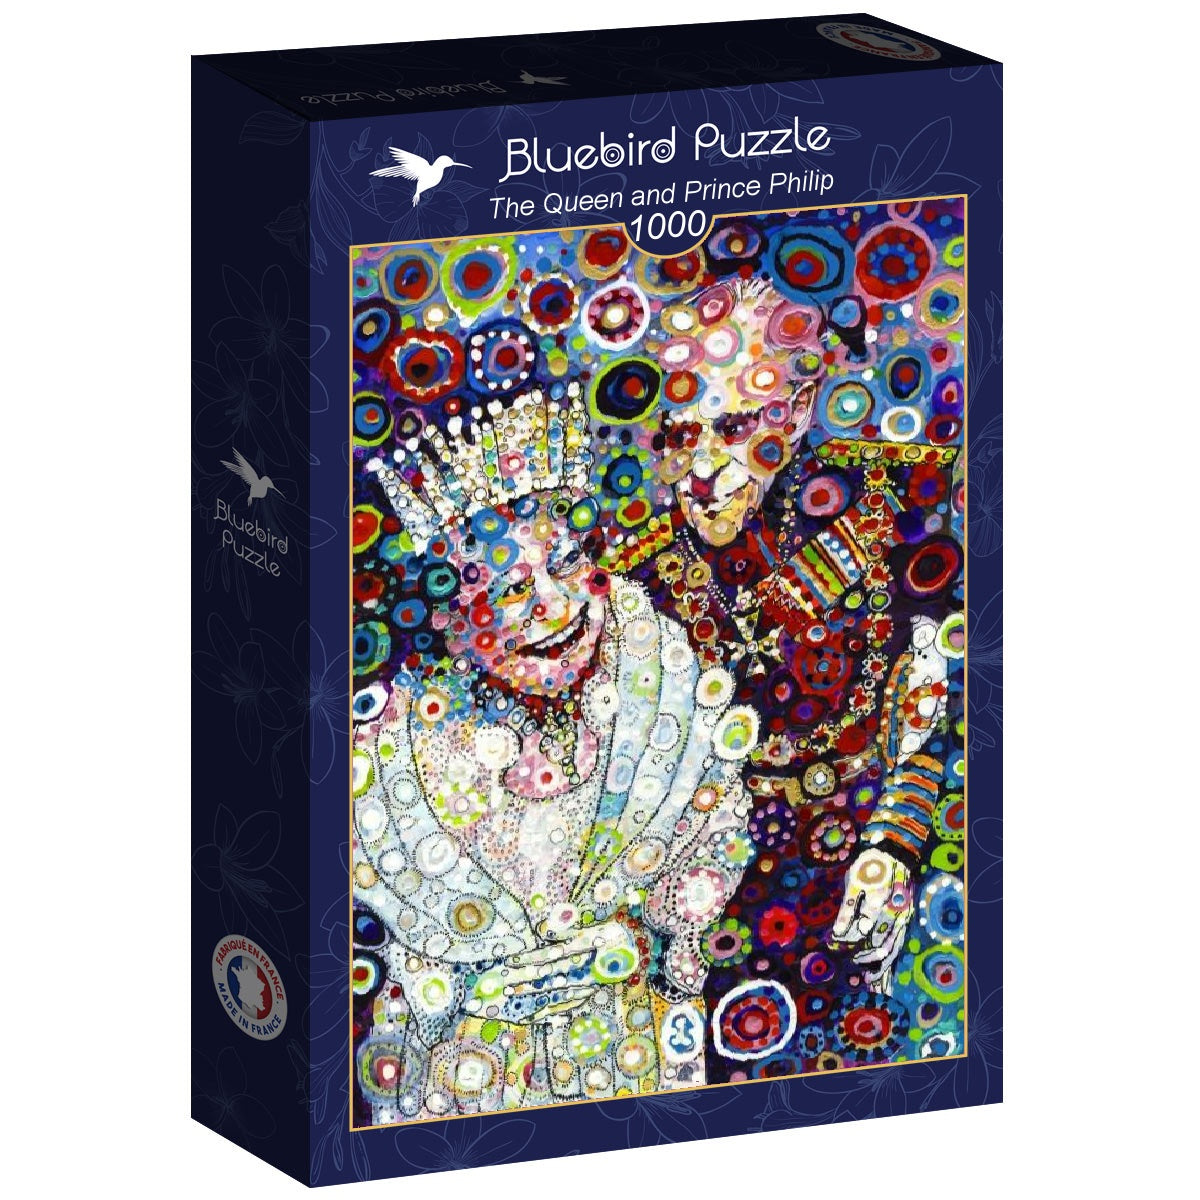 Bluebird Puzzle - The Queen and Prince Philip - 1000 Piece Jigsaw Puzzle